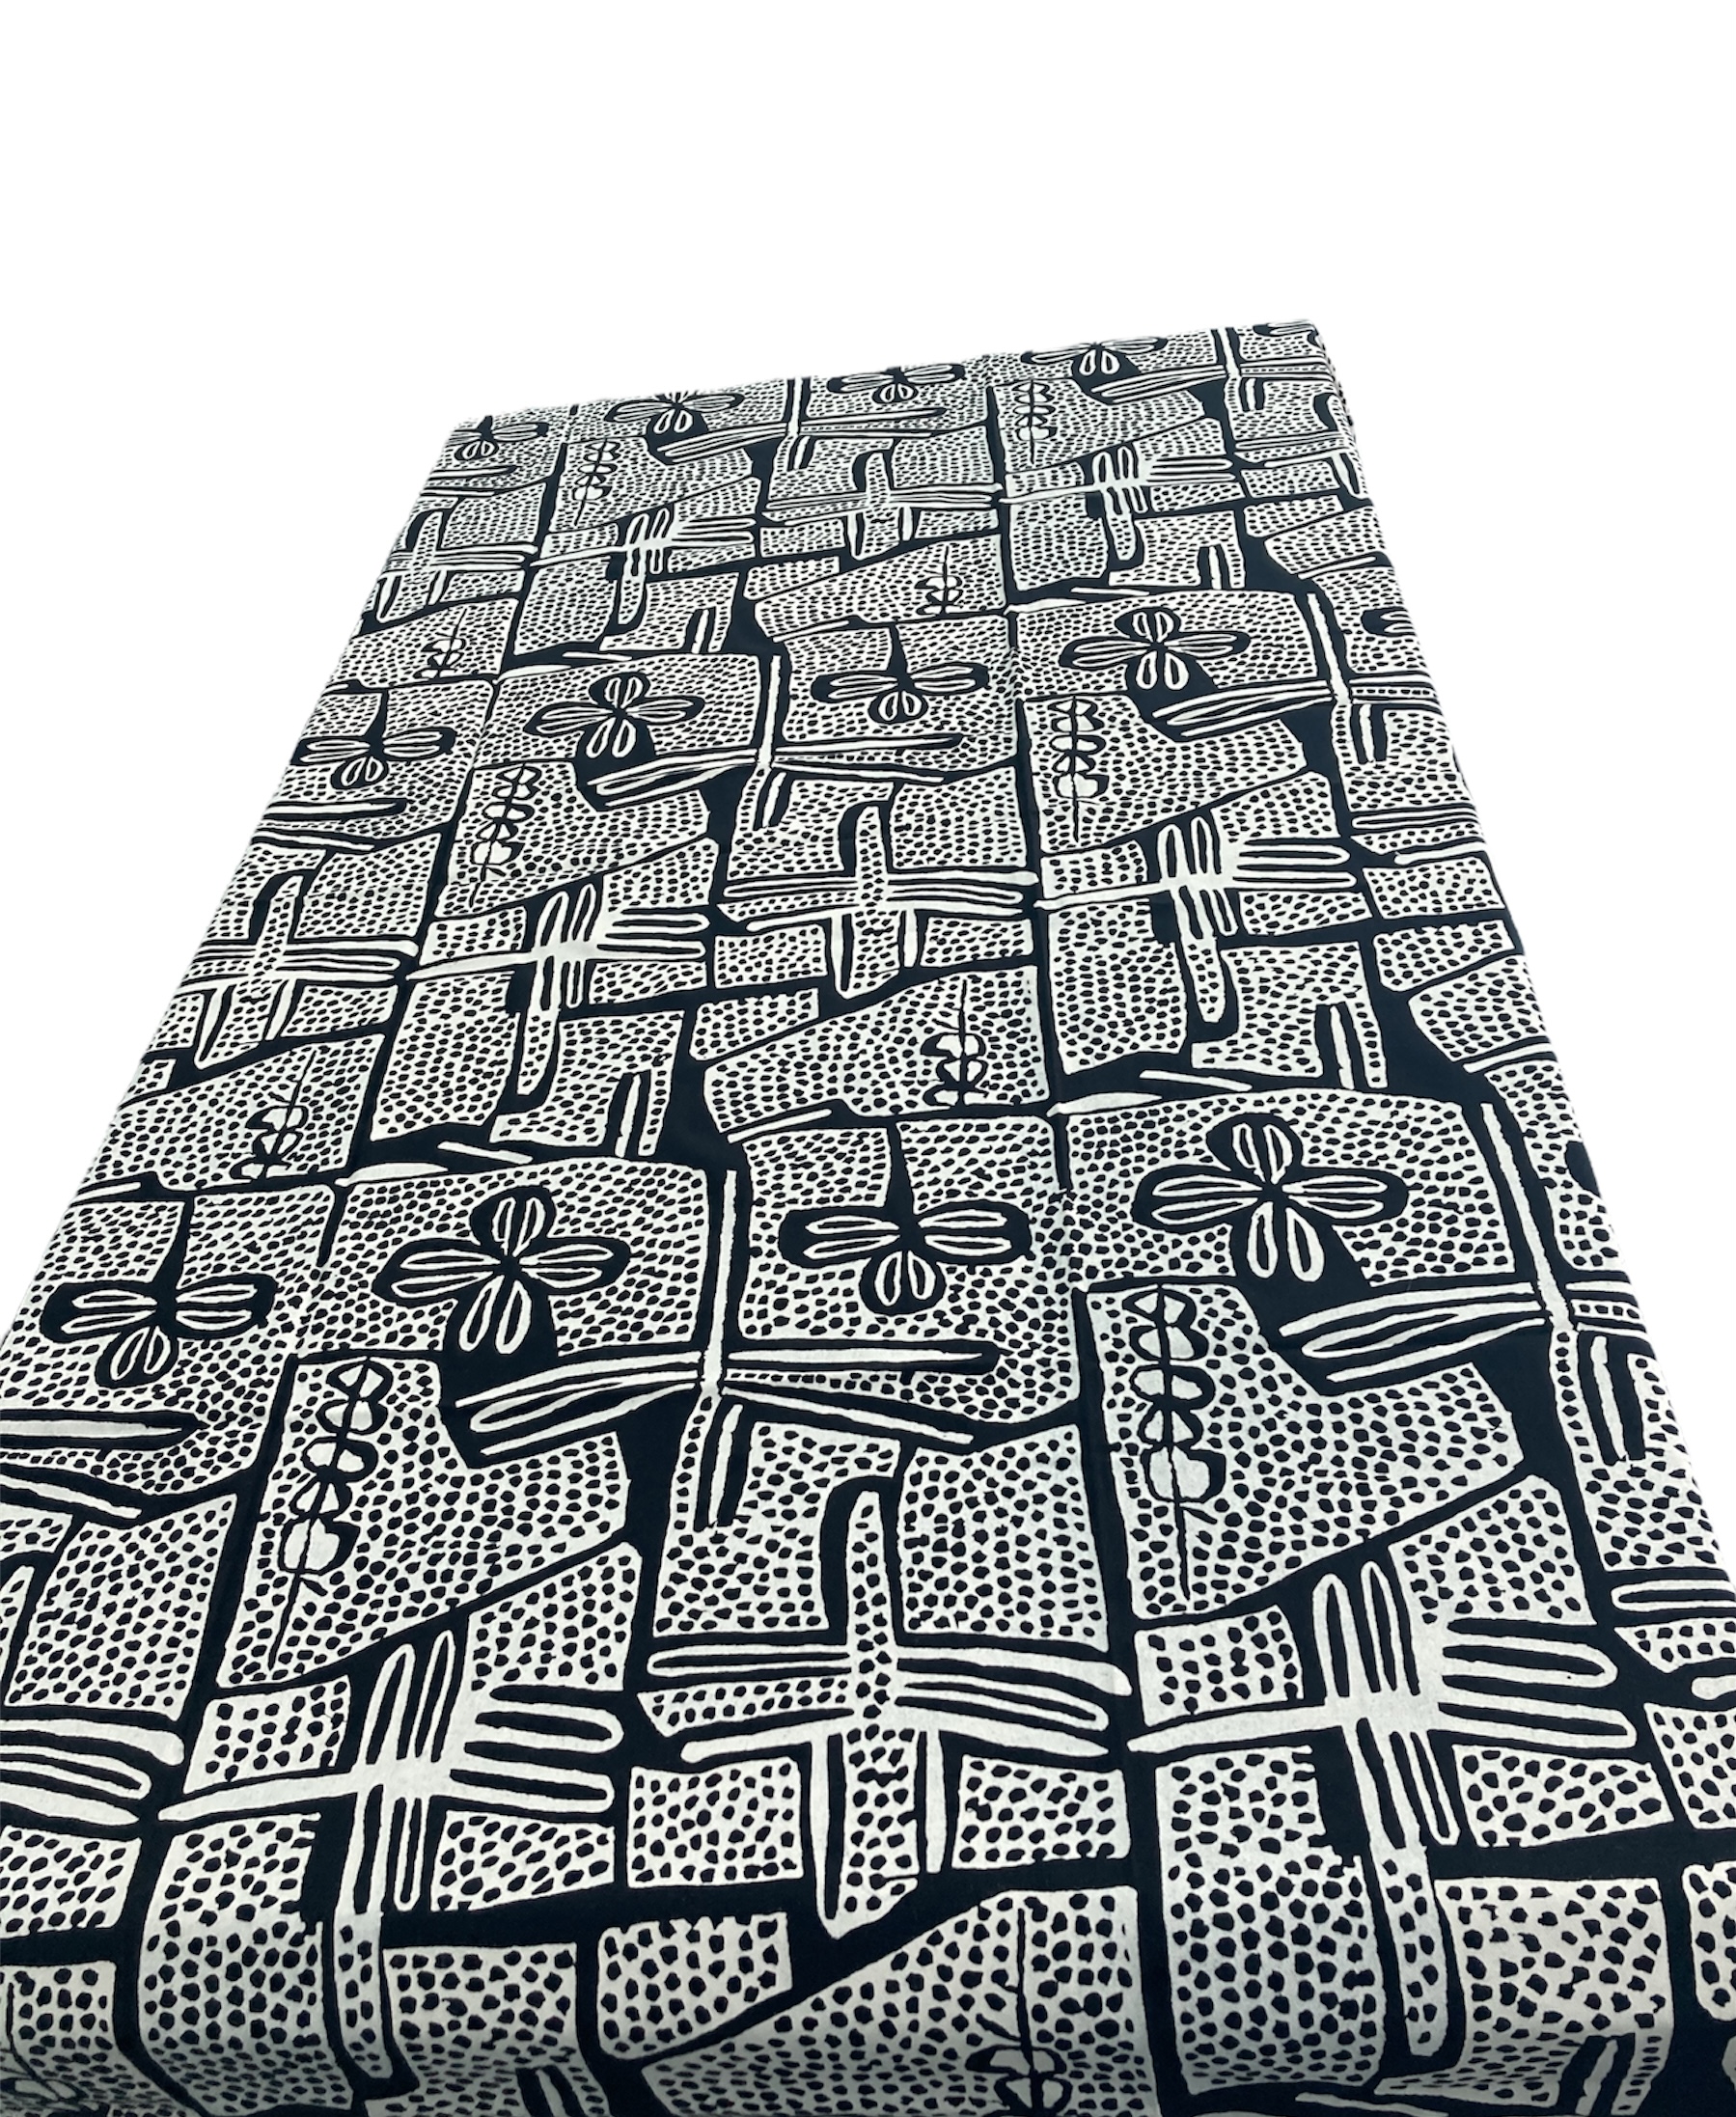 100% cotton Tablecloth approx. 87" x 57" from Namibia - # baw09t